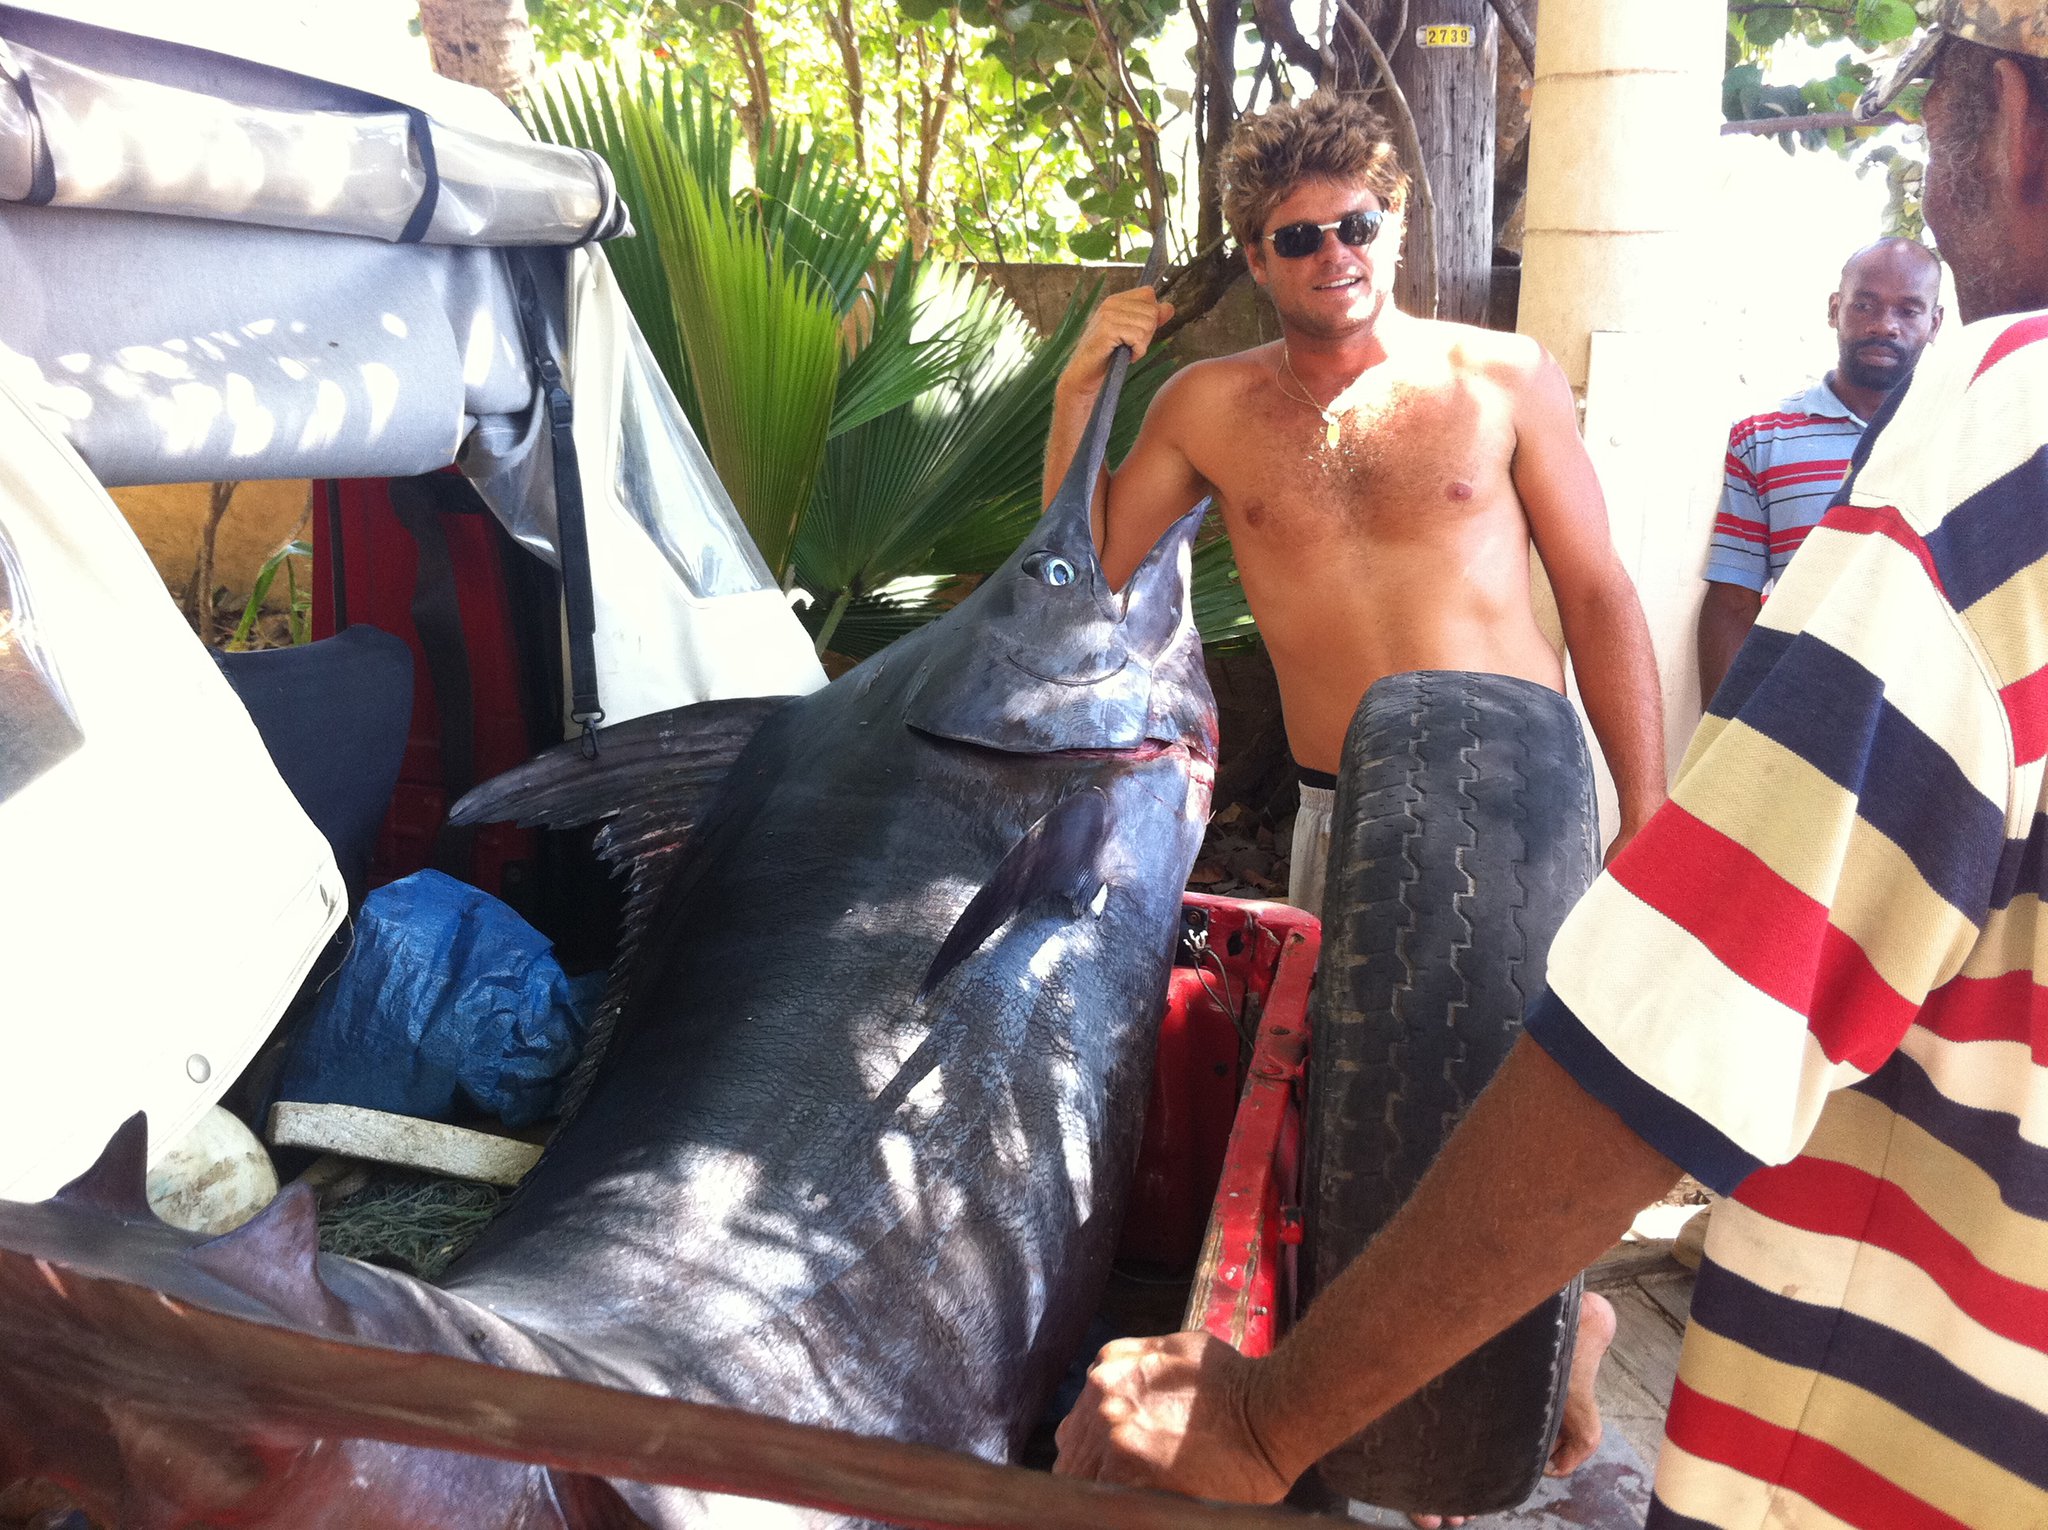 And one more Marlin for Sebastien